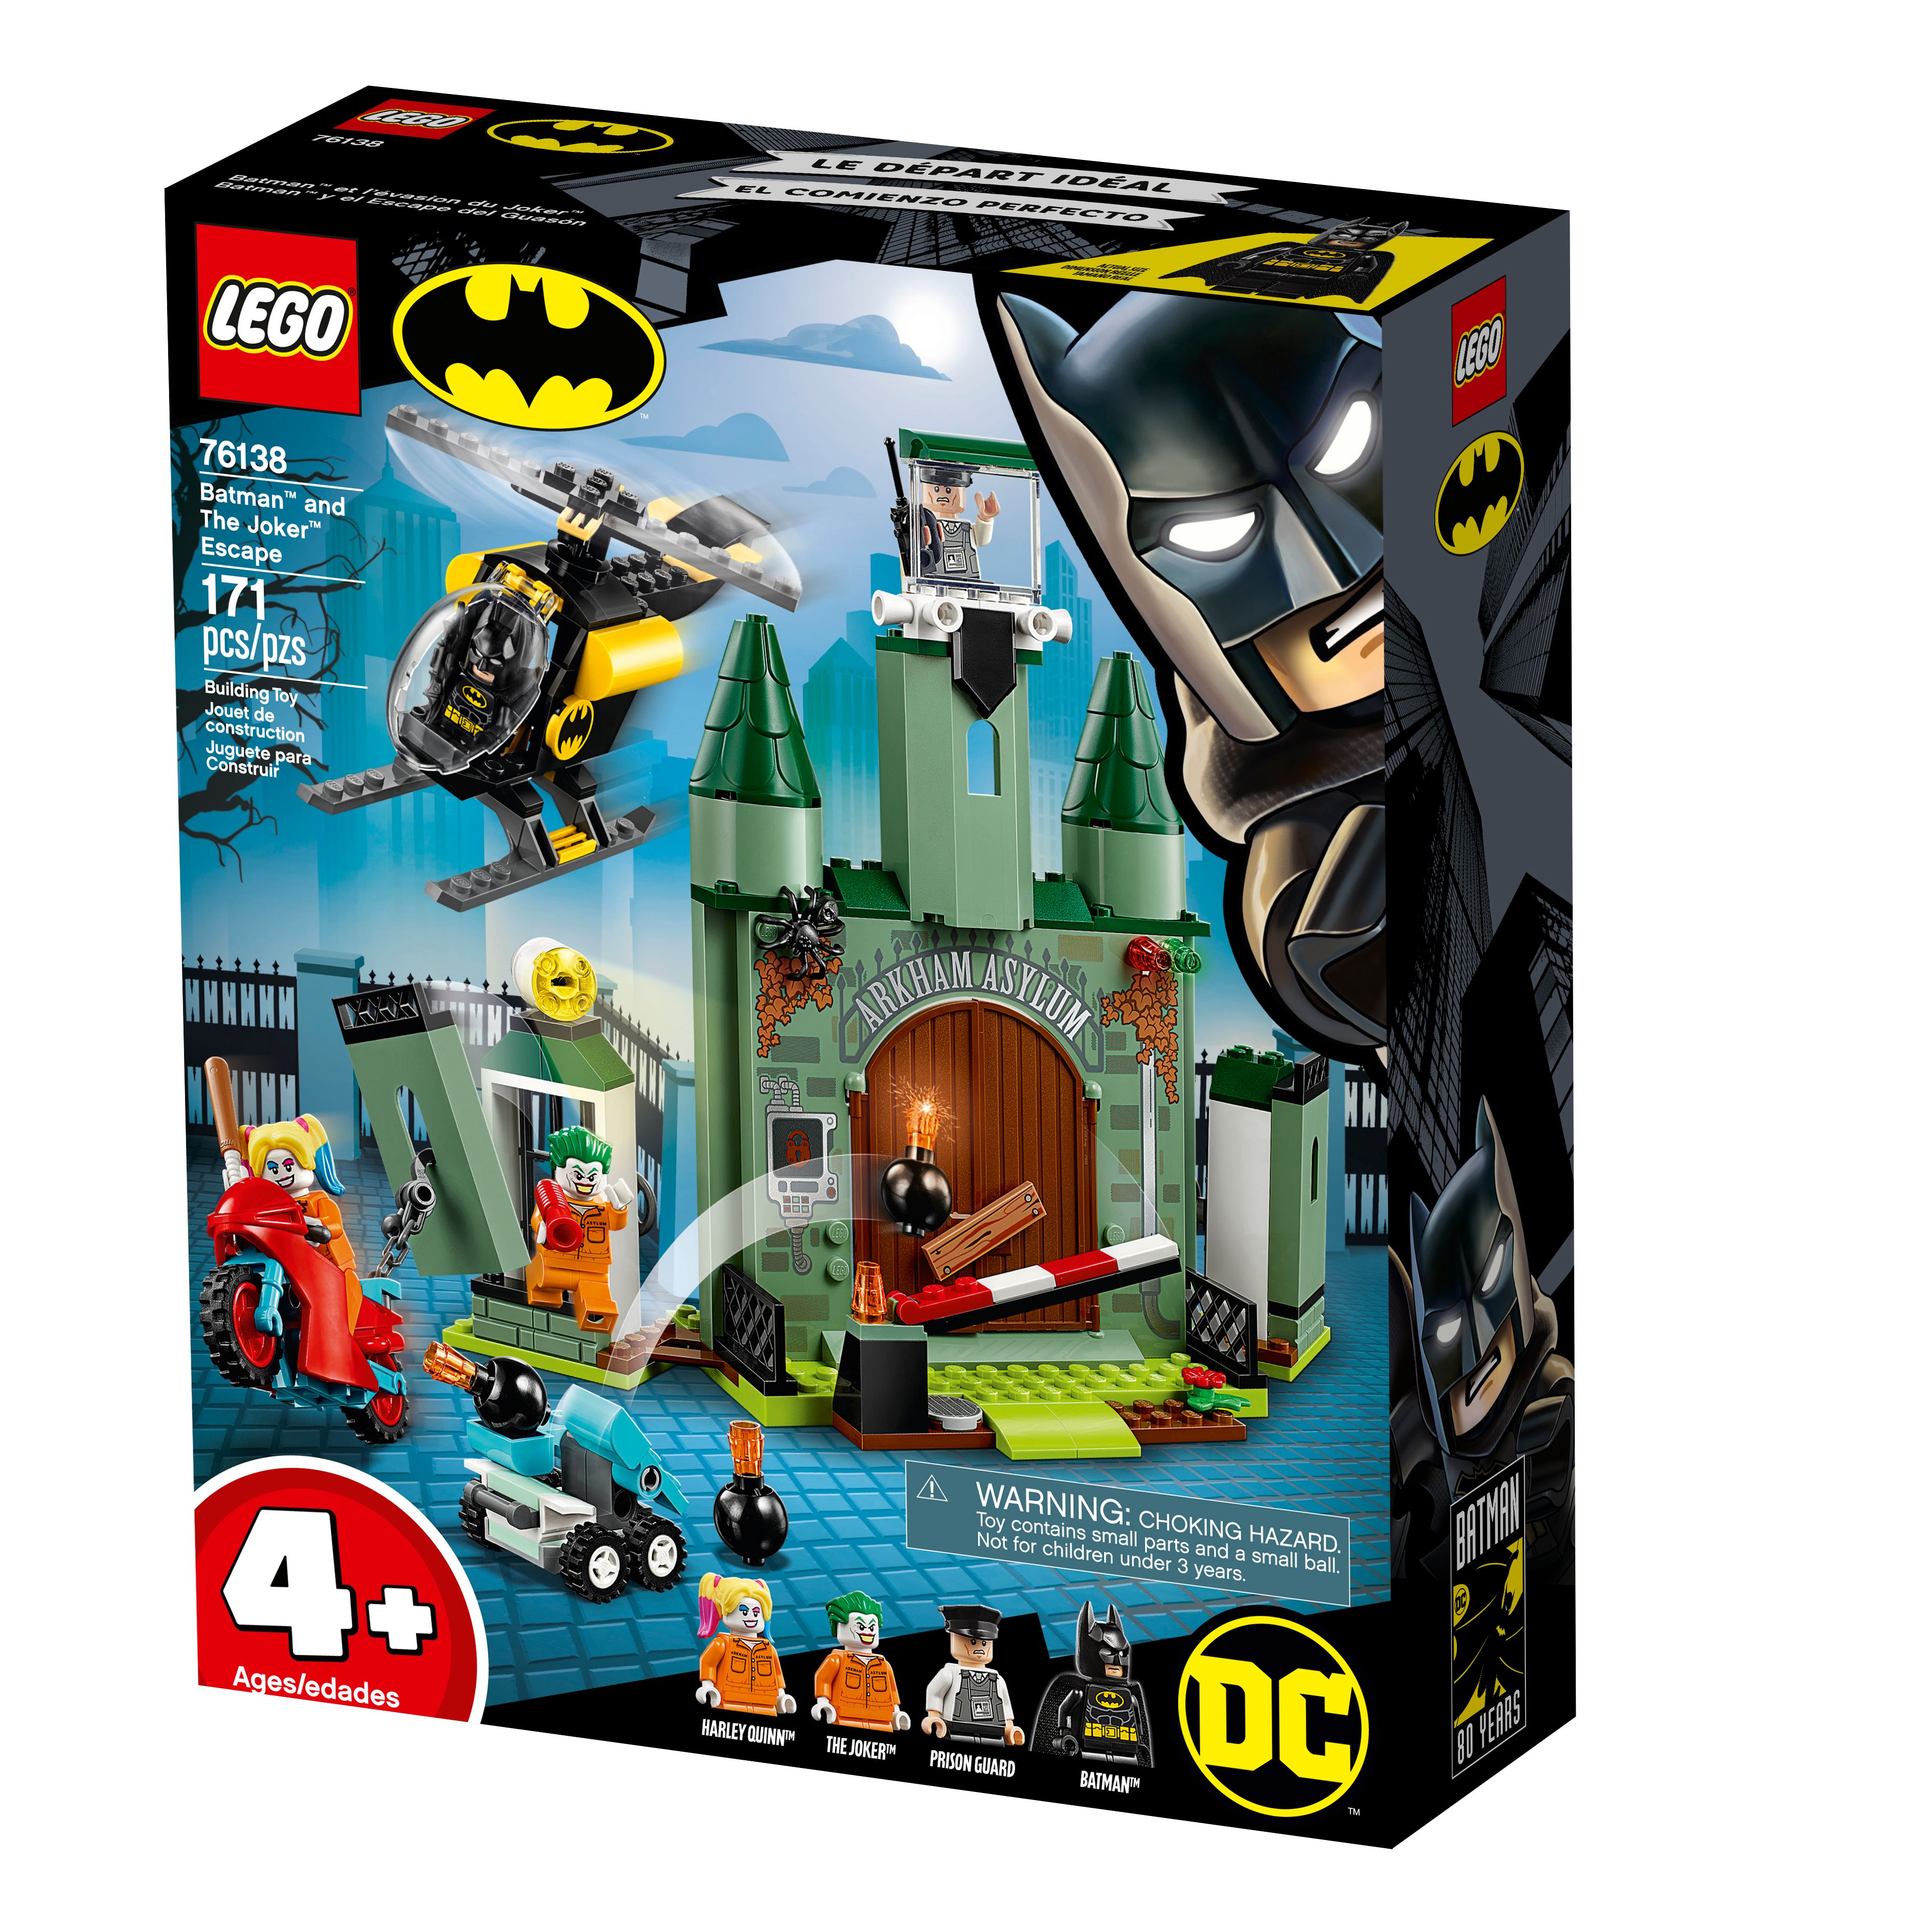 New LEGO Batman Sets Being Released for 